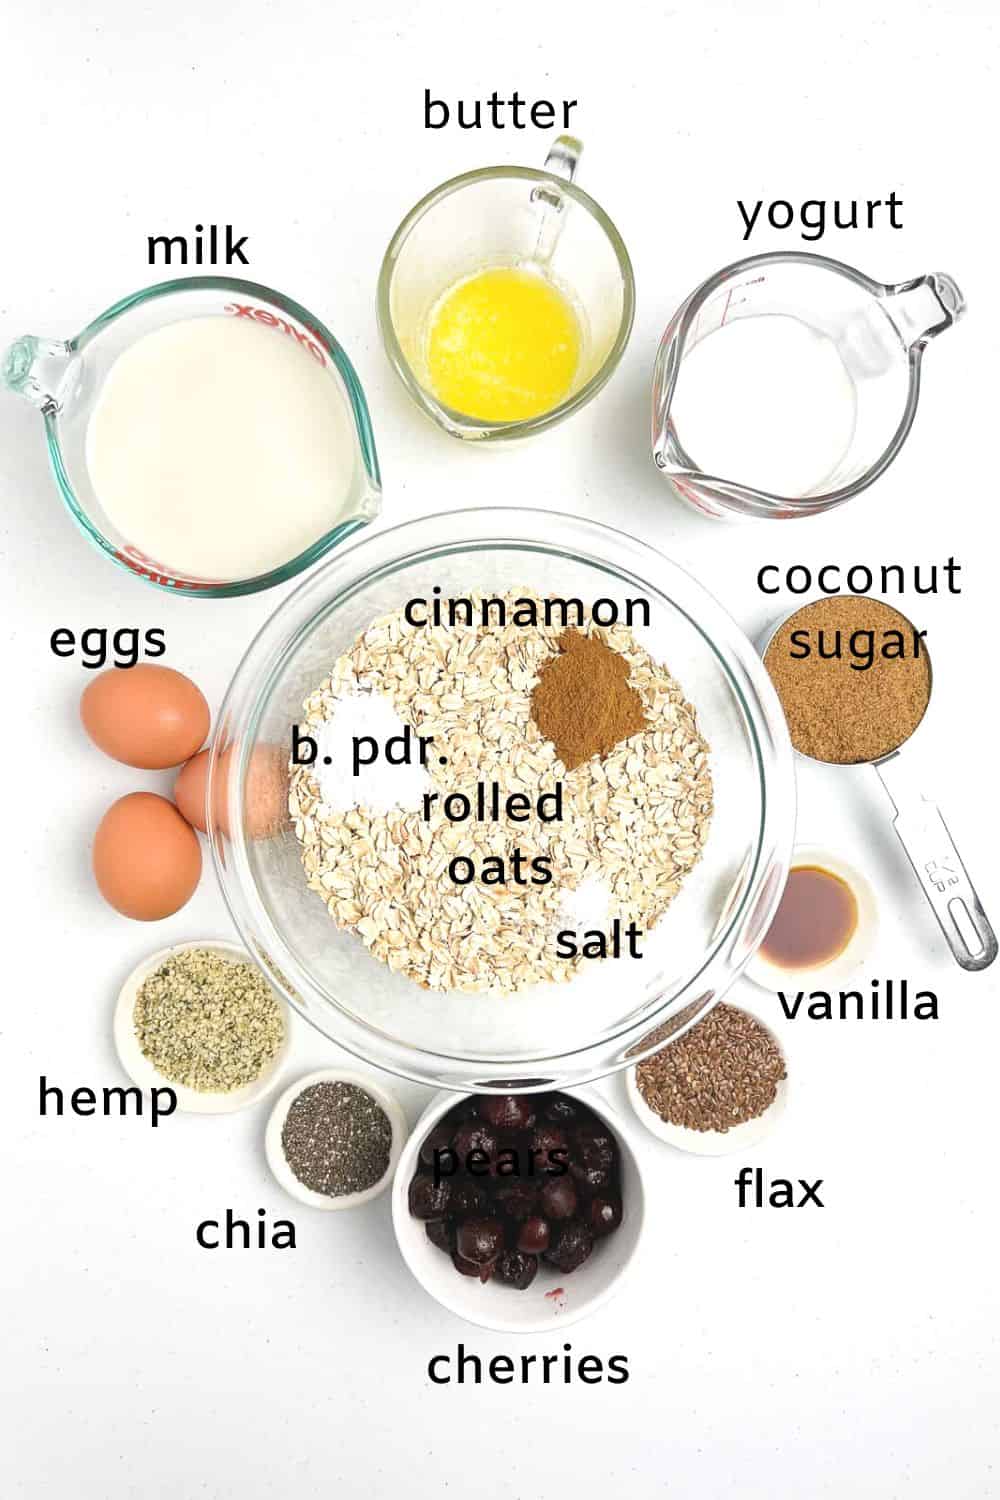 Labelled ingredients for baked oatmeal with cherries.